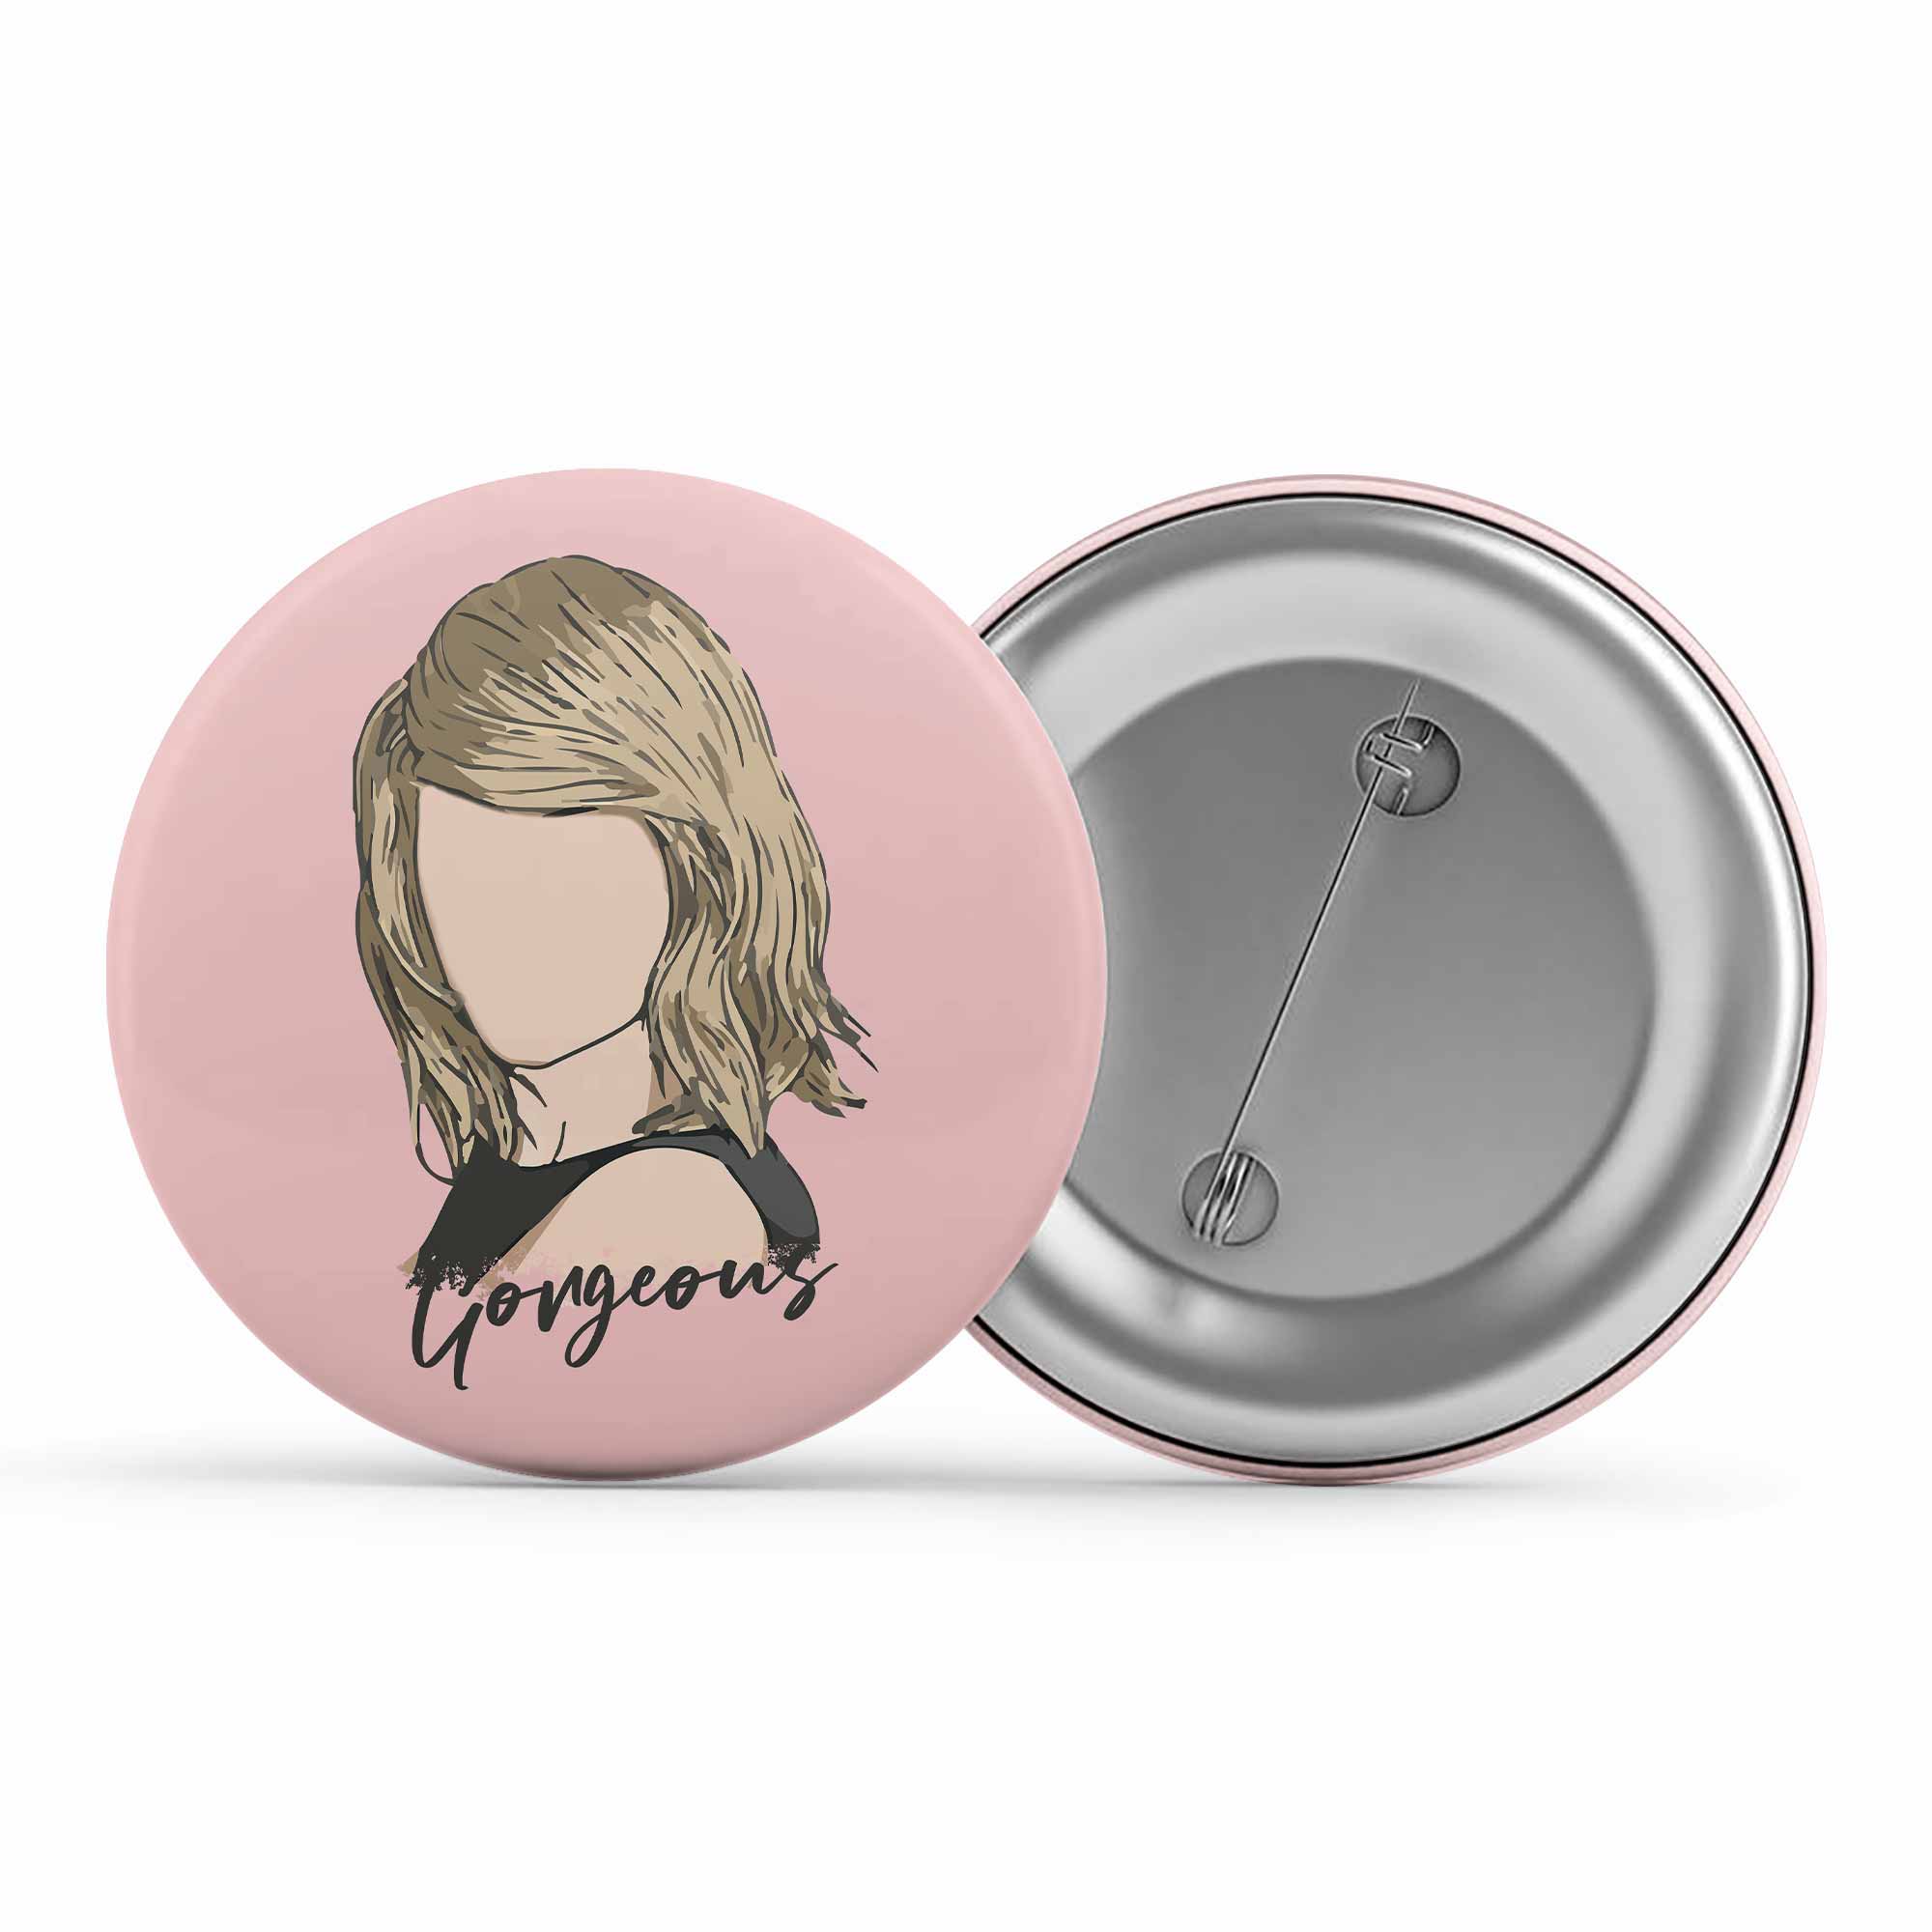 Buy Taylor Swift Badge Gorgeous At Rs 50 Off 🤑 The Banyan Tee 